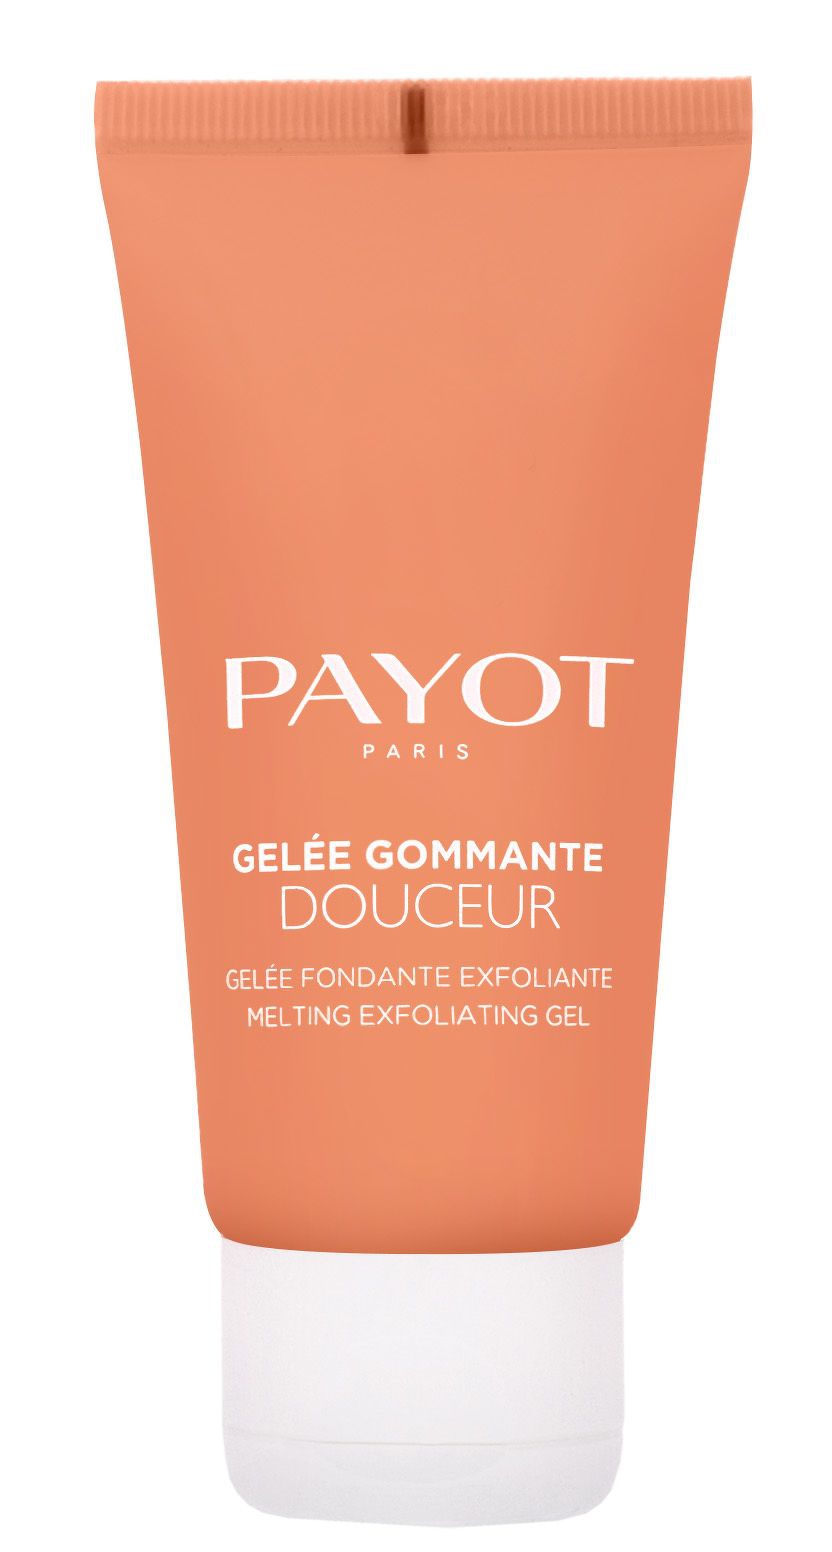 Payot Gelee Gommante Douceur